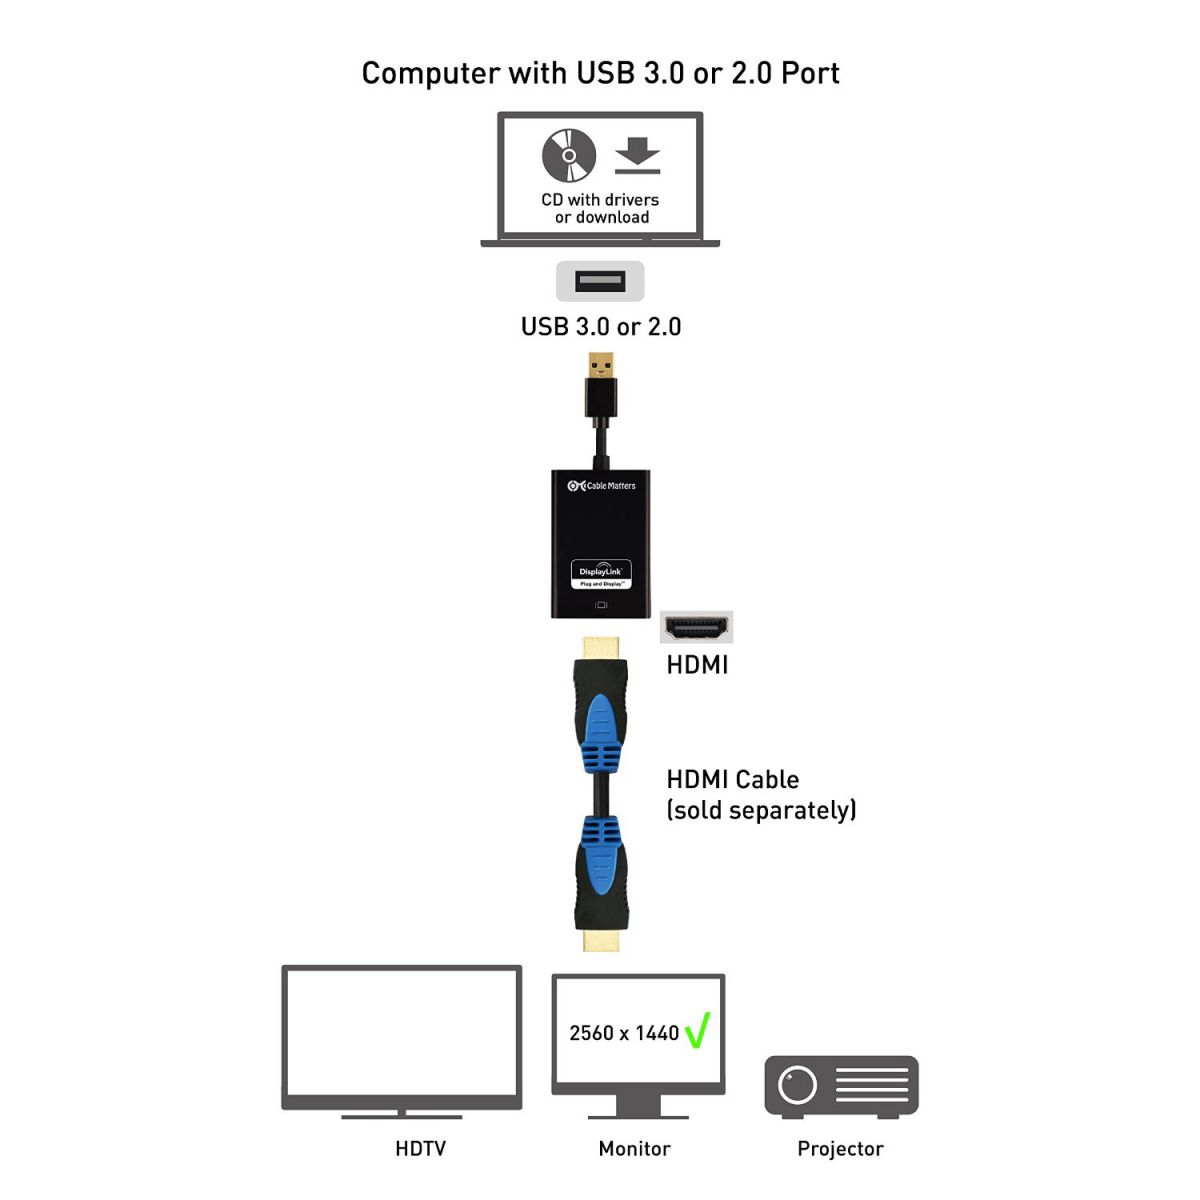 USB 3.0 to SATA III 2.5 SSD/HDD Adapter - Cable Matters Knowledge Base